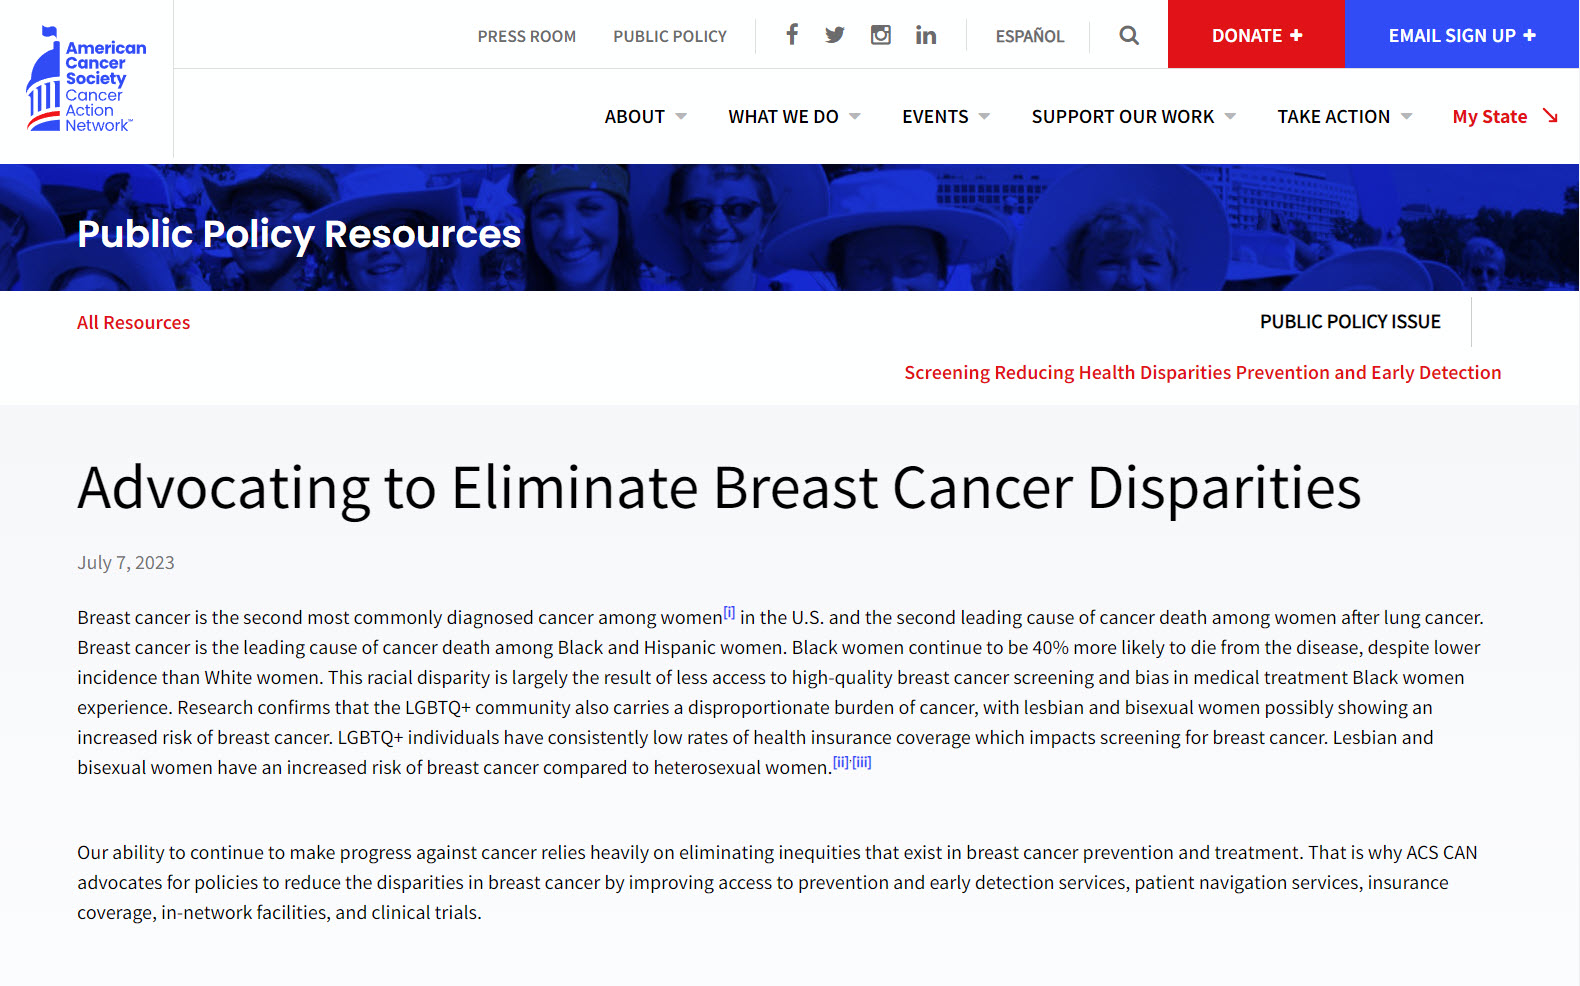 ACSCAN Advocating for Breast Cancer Page